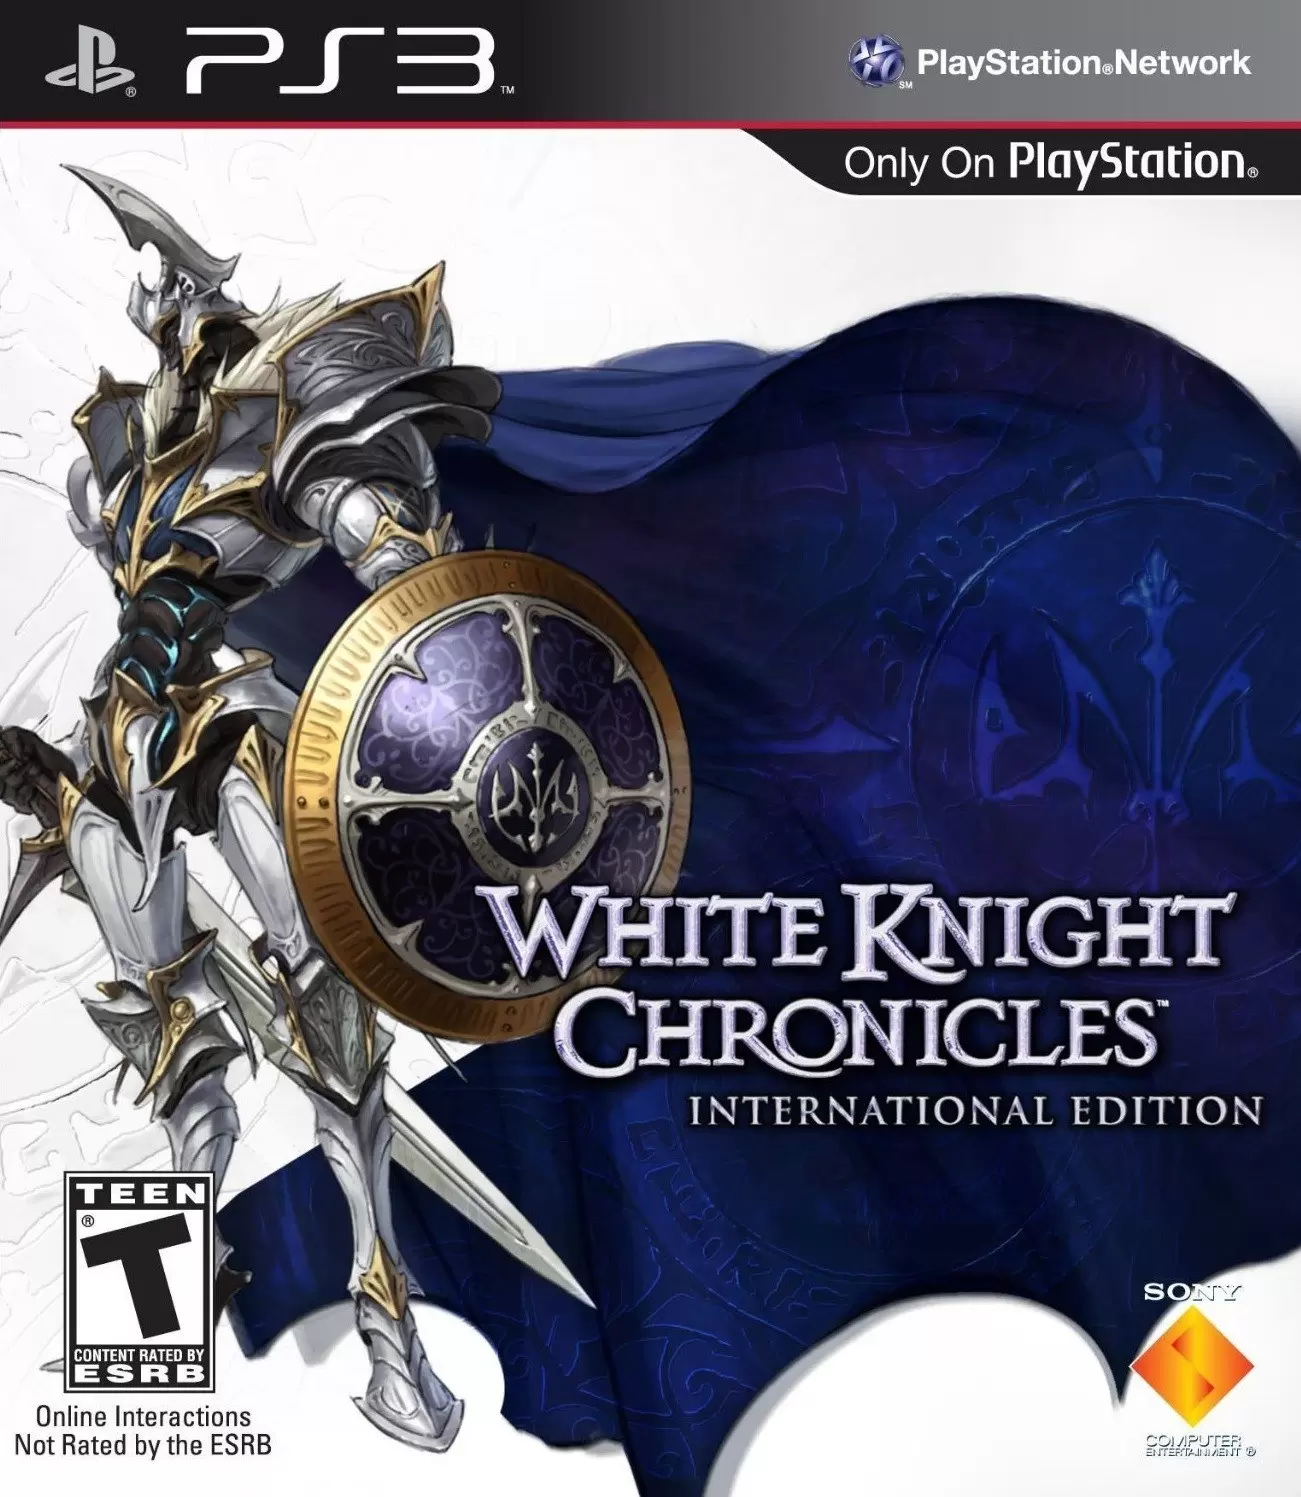 PS3 Games - White Knight Chronicles: International Edition